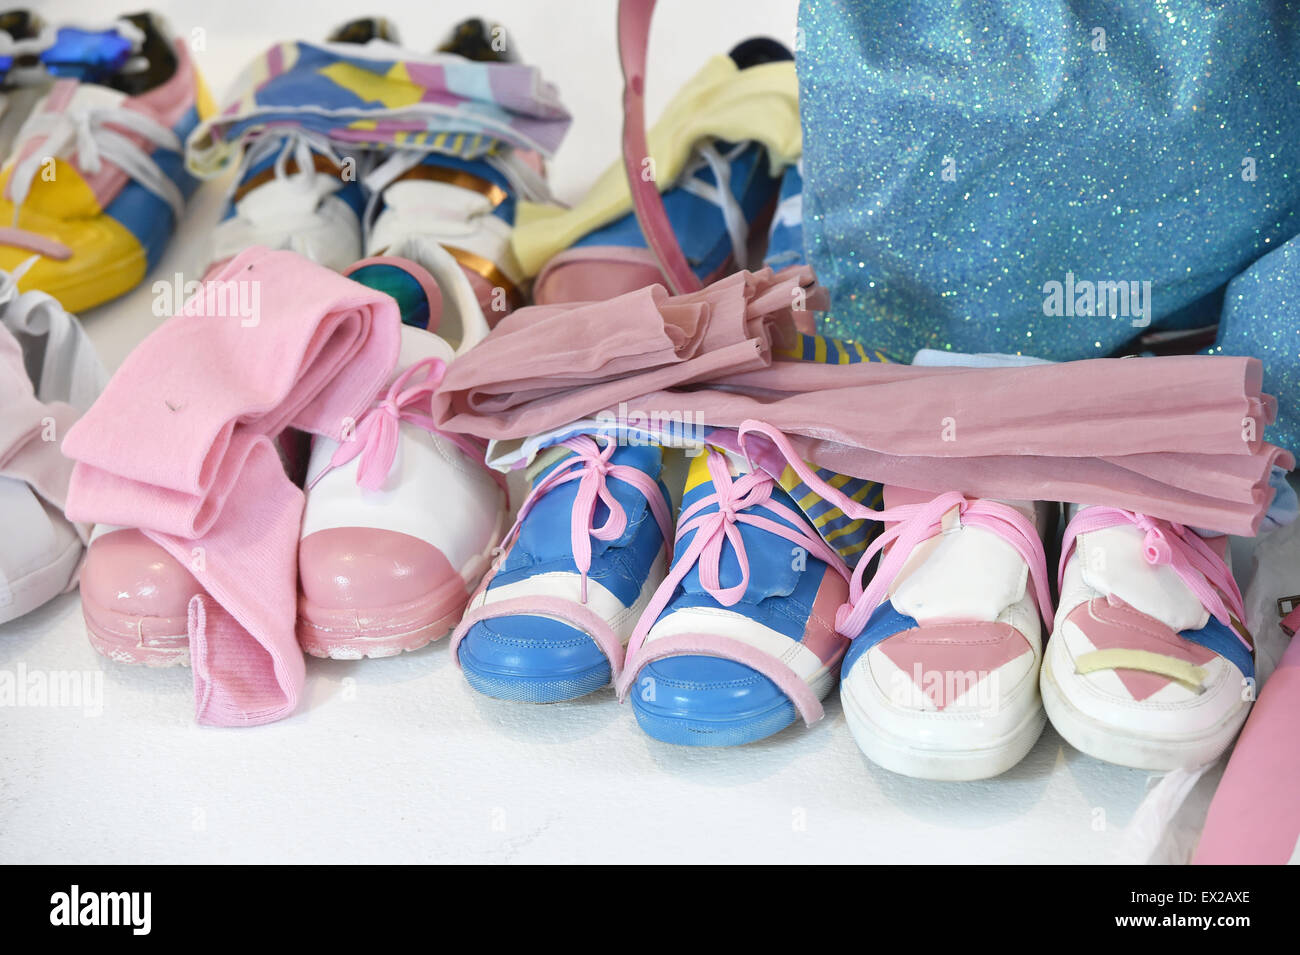 Berlin, Germany. 5th July, 2015. Shoes and accessories can be seen during the fitting for the show 'Designer for Tomorrow' at the Mercedes-Benz Fashion Week Berlin, Germany, 05 July 2015. An initiative by Peek & Cloppenburg and Fashion ID promotes new designers in the context of their young talents award 'Designer for Tomorrow'. During the Berlin Fashion Week, the collections for Spring/Summer 2016 are presented. Photo: JENS KALAENE/dpa/Alamy Live News Stock Photo